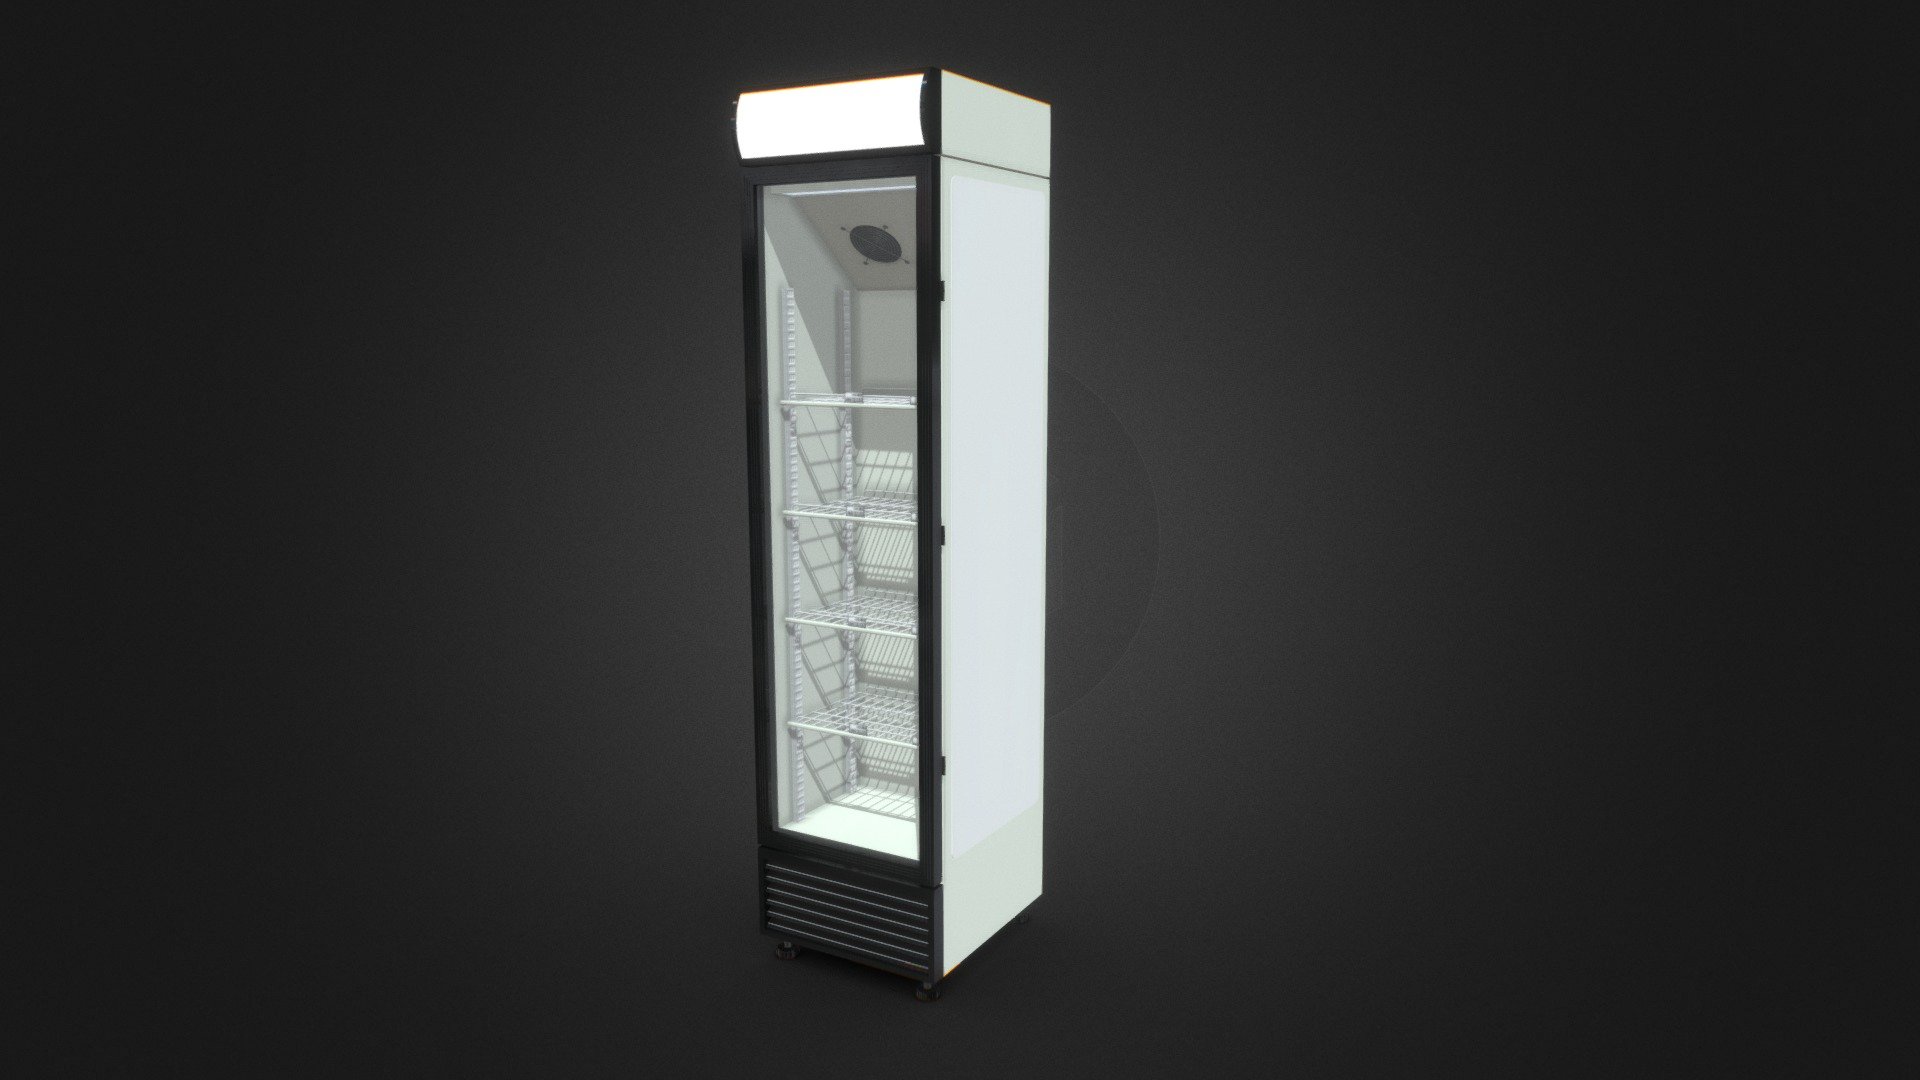 Tall single standing fridge freezer typically used in a shop or retail environment for soft drinks. 
glass door for visibility 3d model